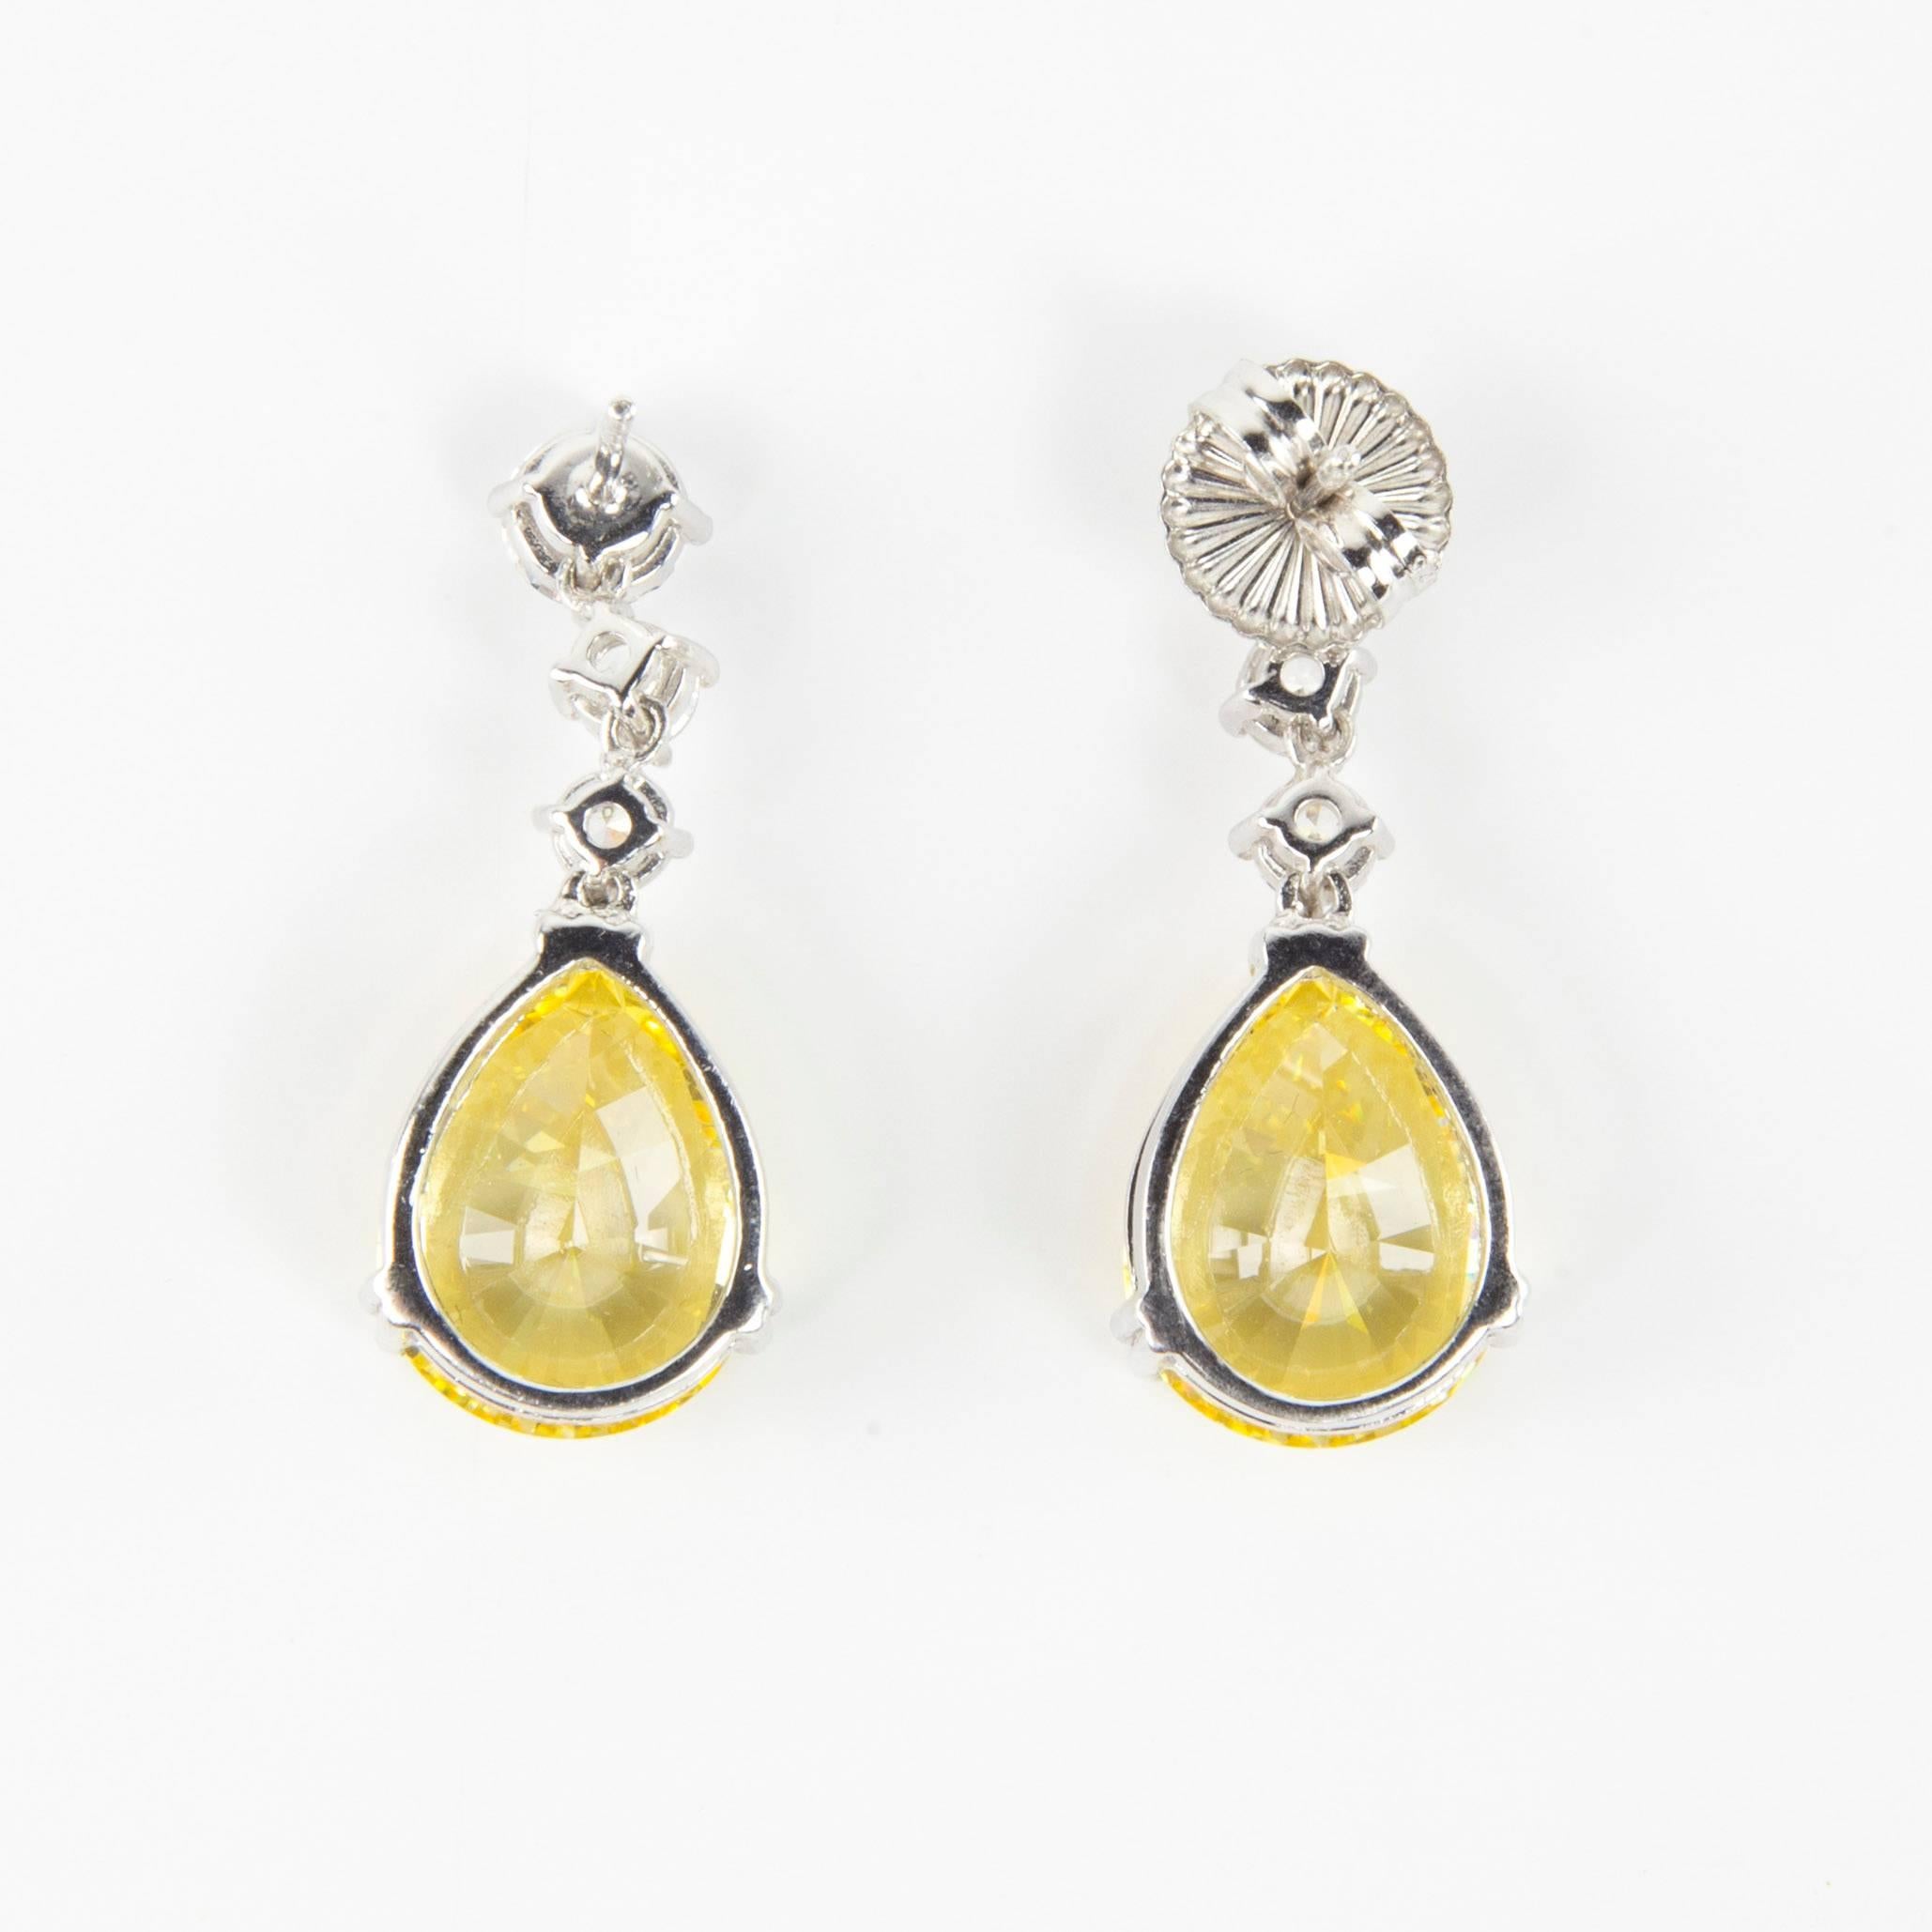 Simply Beautiful…each dangle earring is set with a 6mm and two 4mm round Faux Diamonds, suspends a large 16mm teardrop shape faux Yellow Diamond, making a striking statement! All hand set in Sterling Silver. Approx. total length 1.5